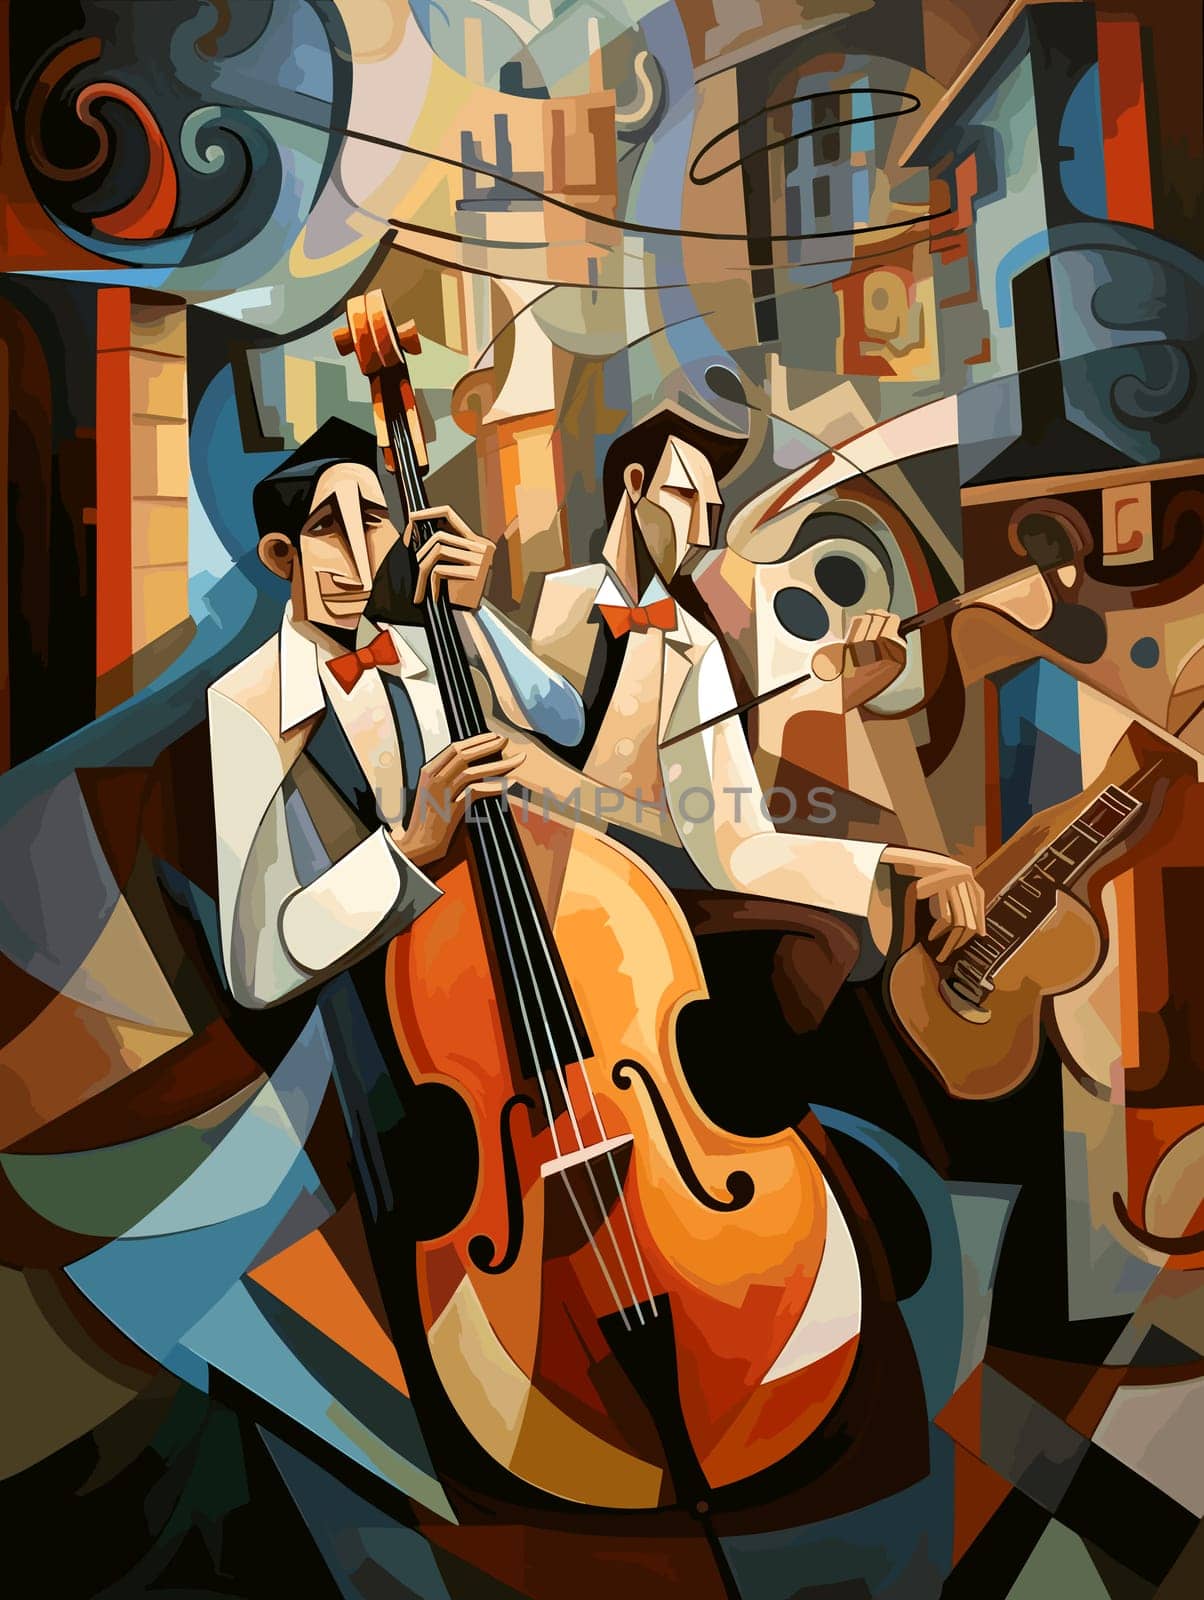 Abstract image of jazz musicians improvising on the streets of New Orleans in cubist pop art style.